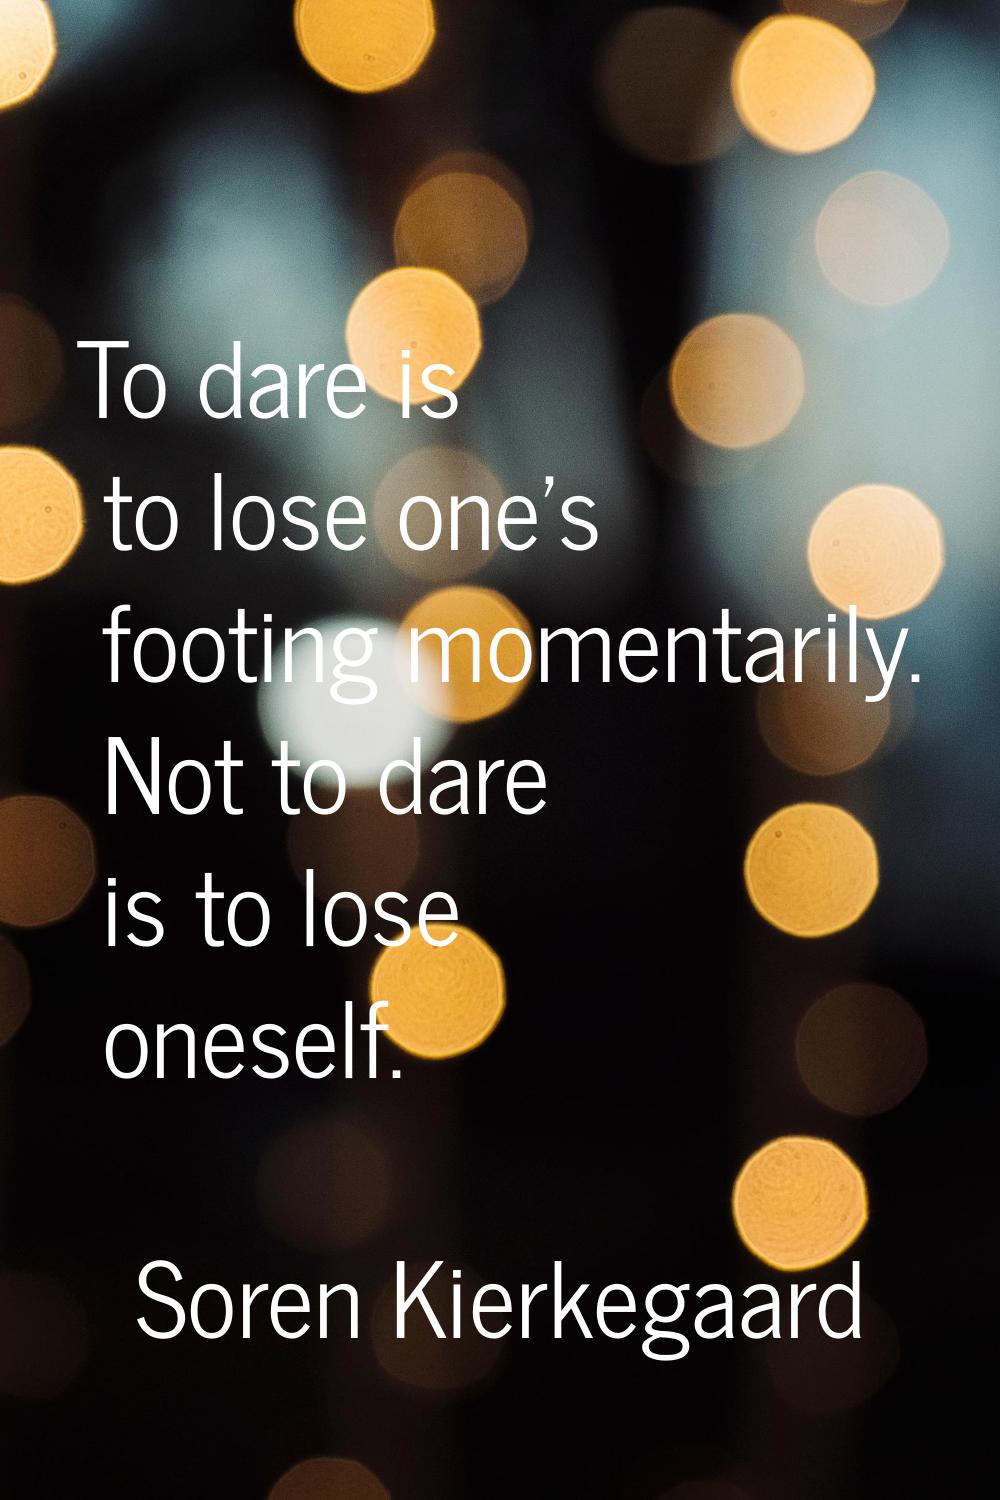 To dare is to lose one's footing momentarily. Not to dare is to lose oneself.